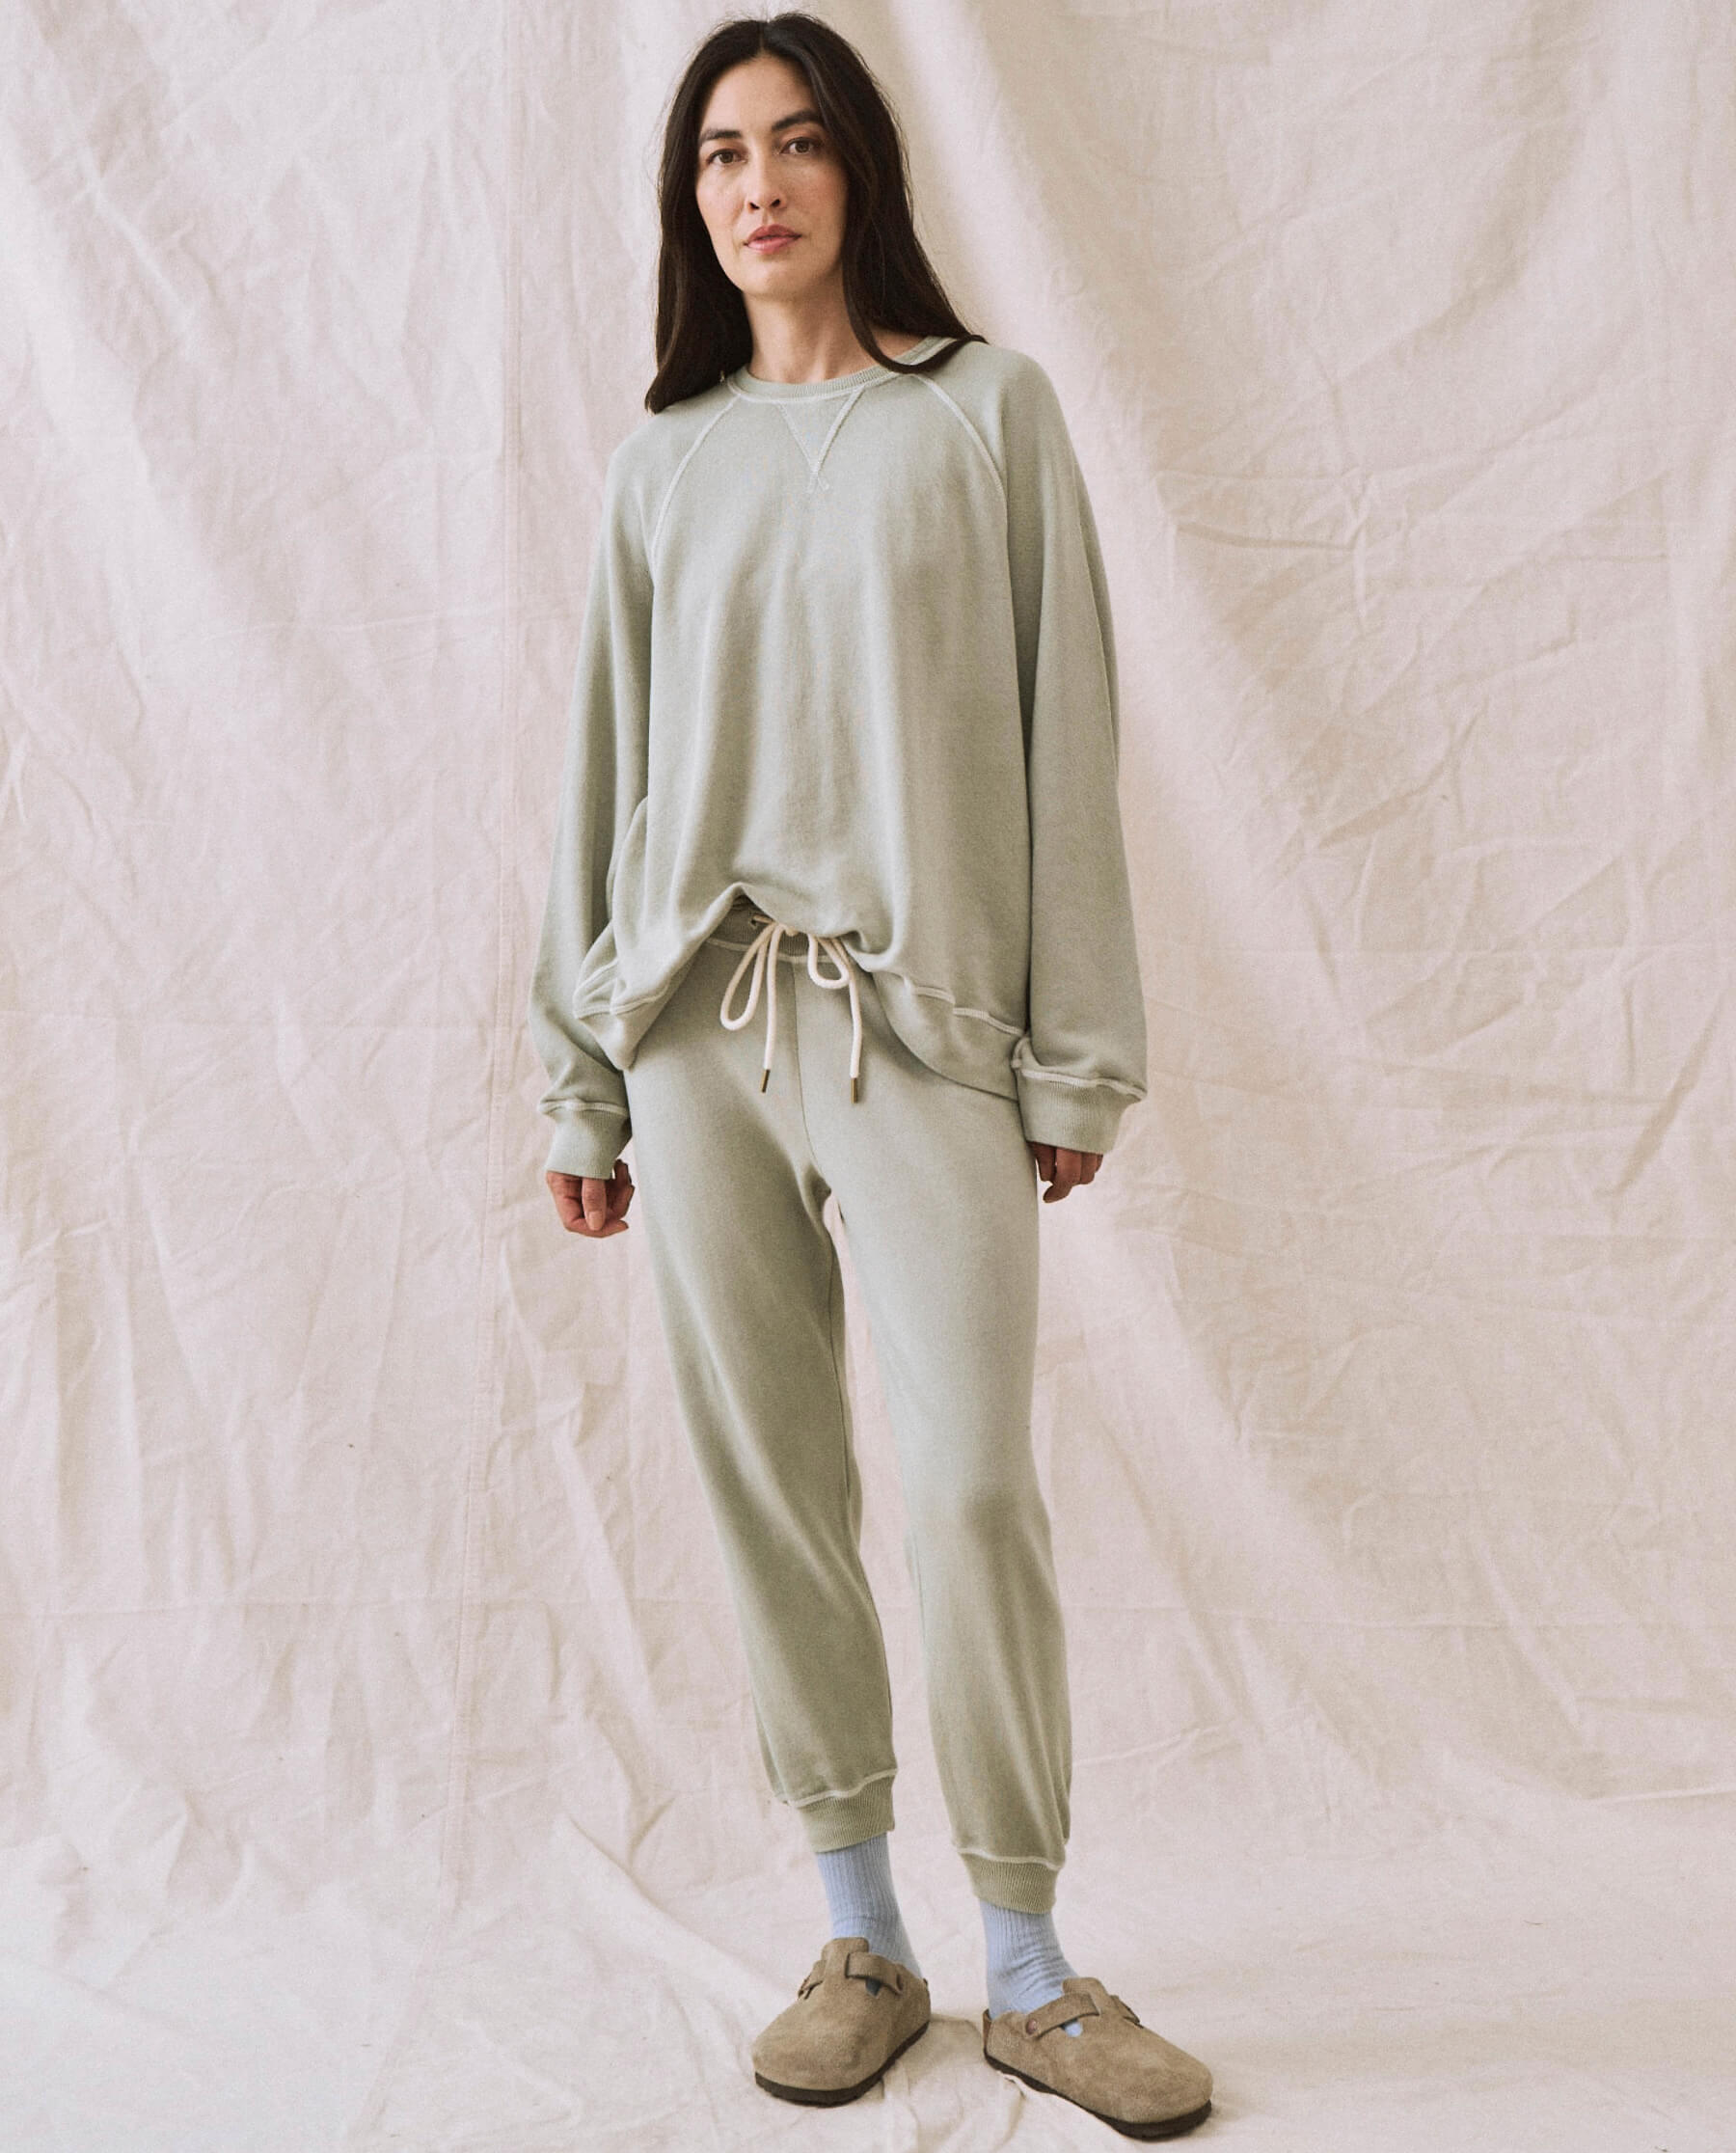 The Cropped Sweatpant. Solid -- Seafoam